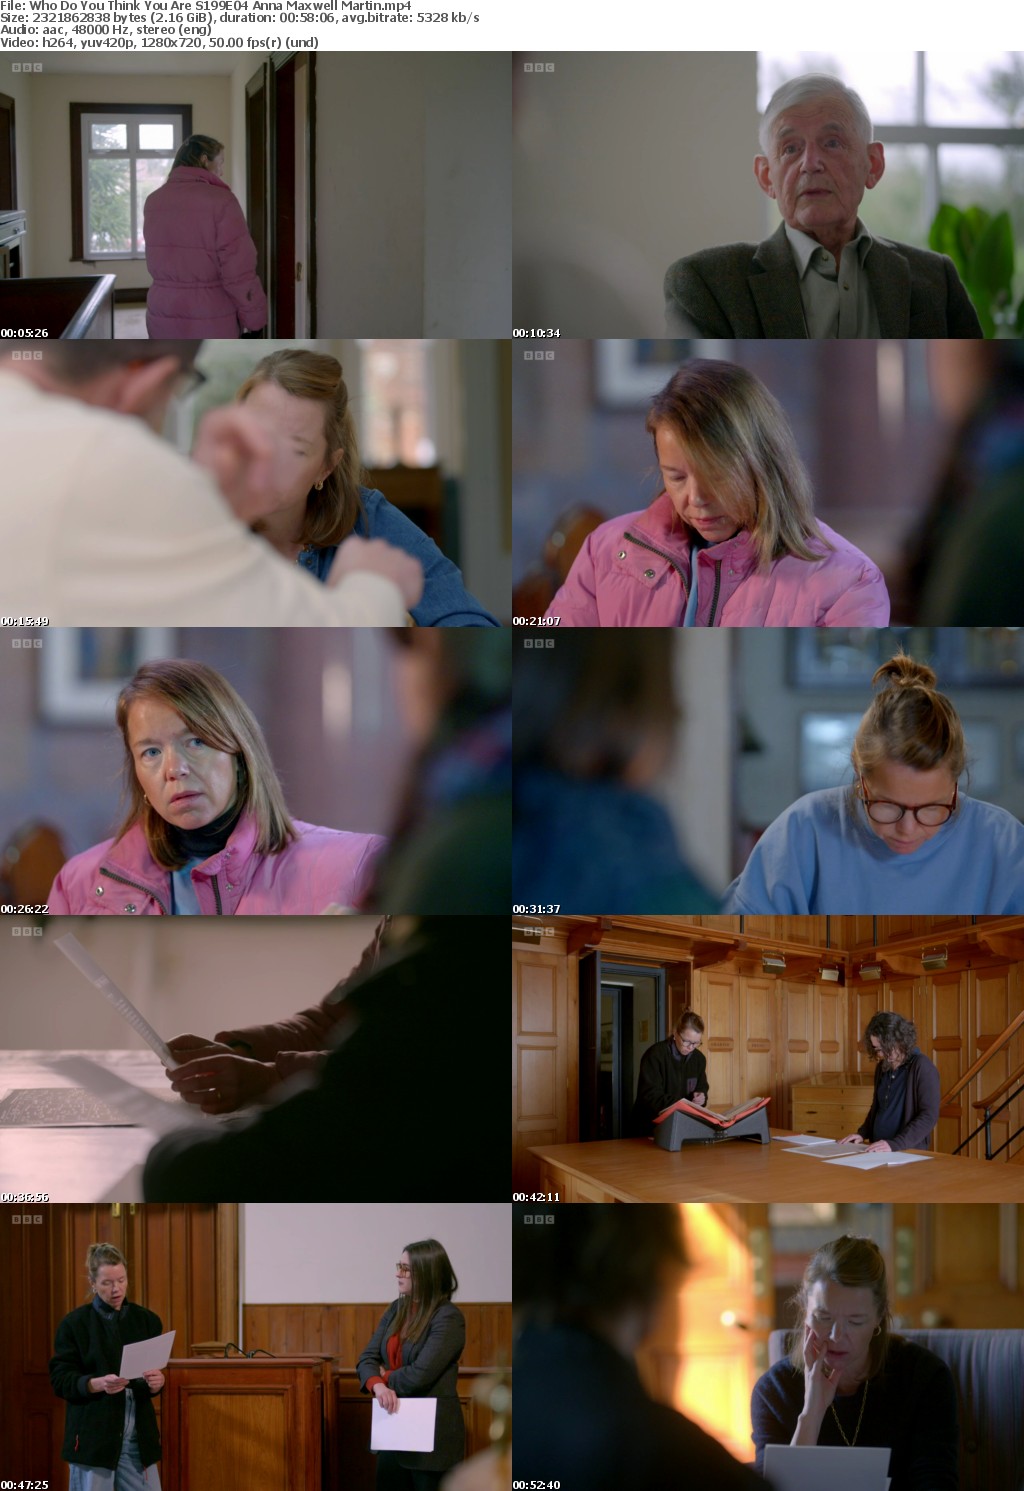 Who Do You Think You Are S199E04 Anna Maxwell Martin (1280x720p HD, 50fps, soft Eng subs)